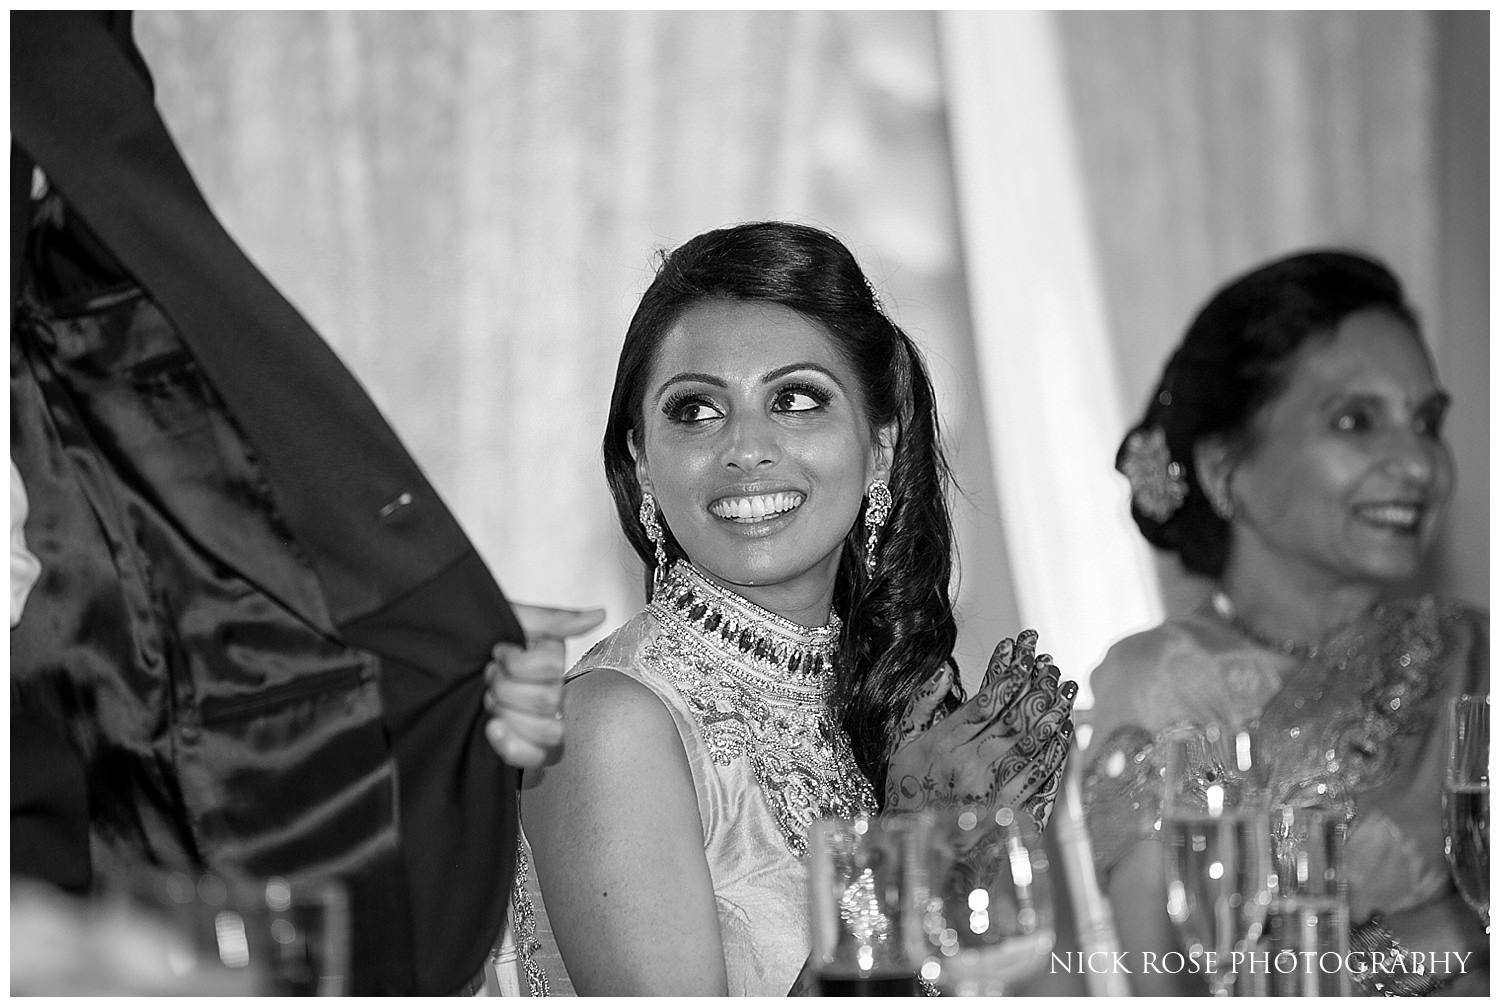  Bride smiling during an Indian wedding reception in Canary Wharf London 